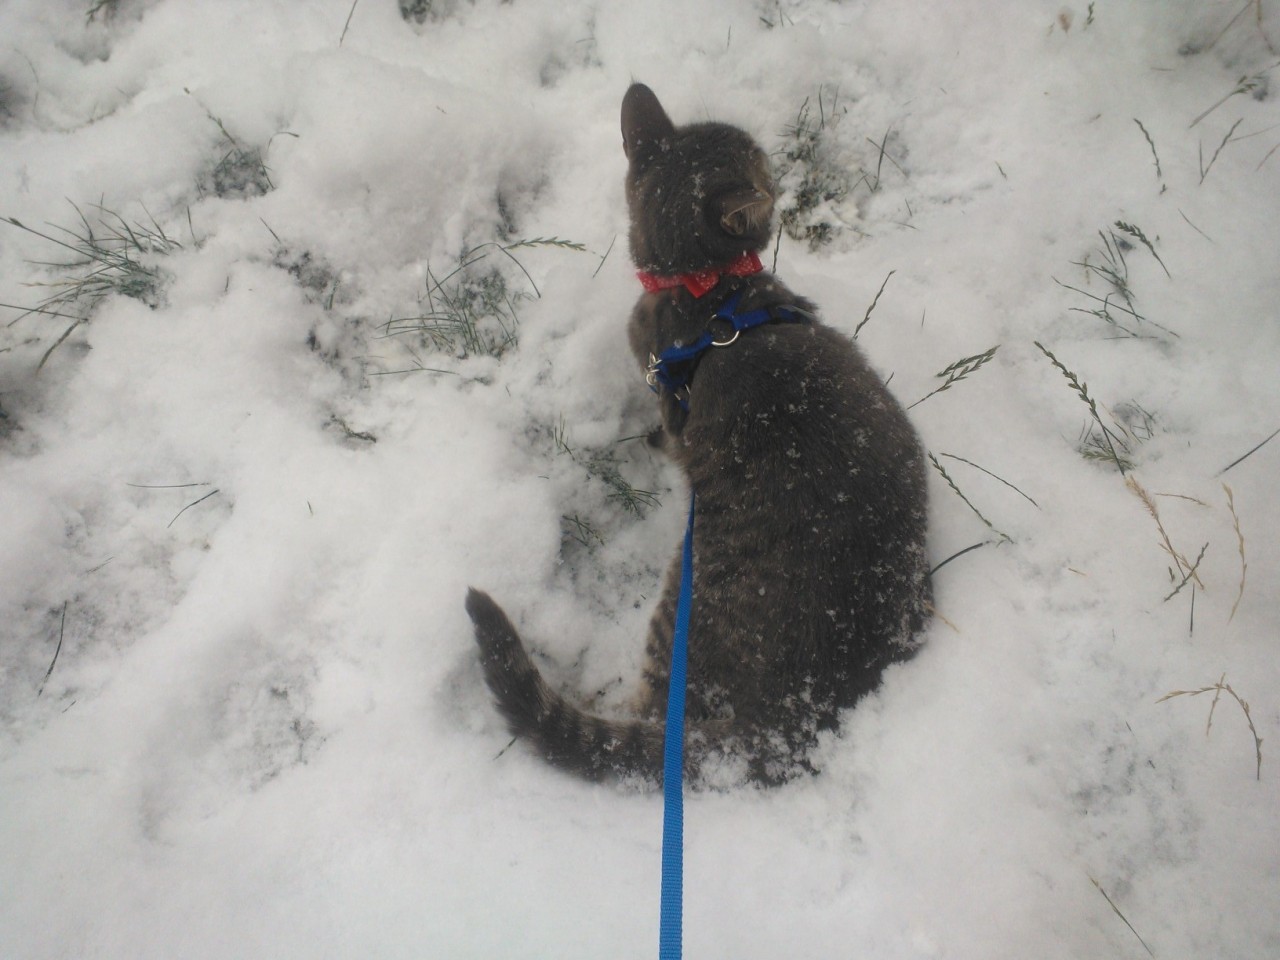 Steve Rogers&rsquo;s first time in the snow, ever I thought he&rsquo;d hate